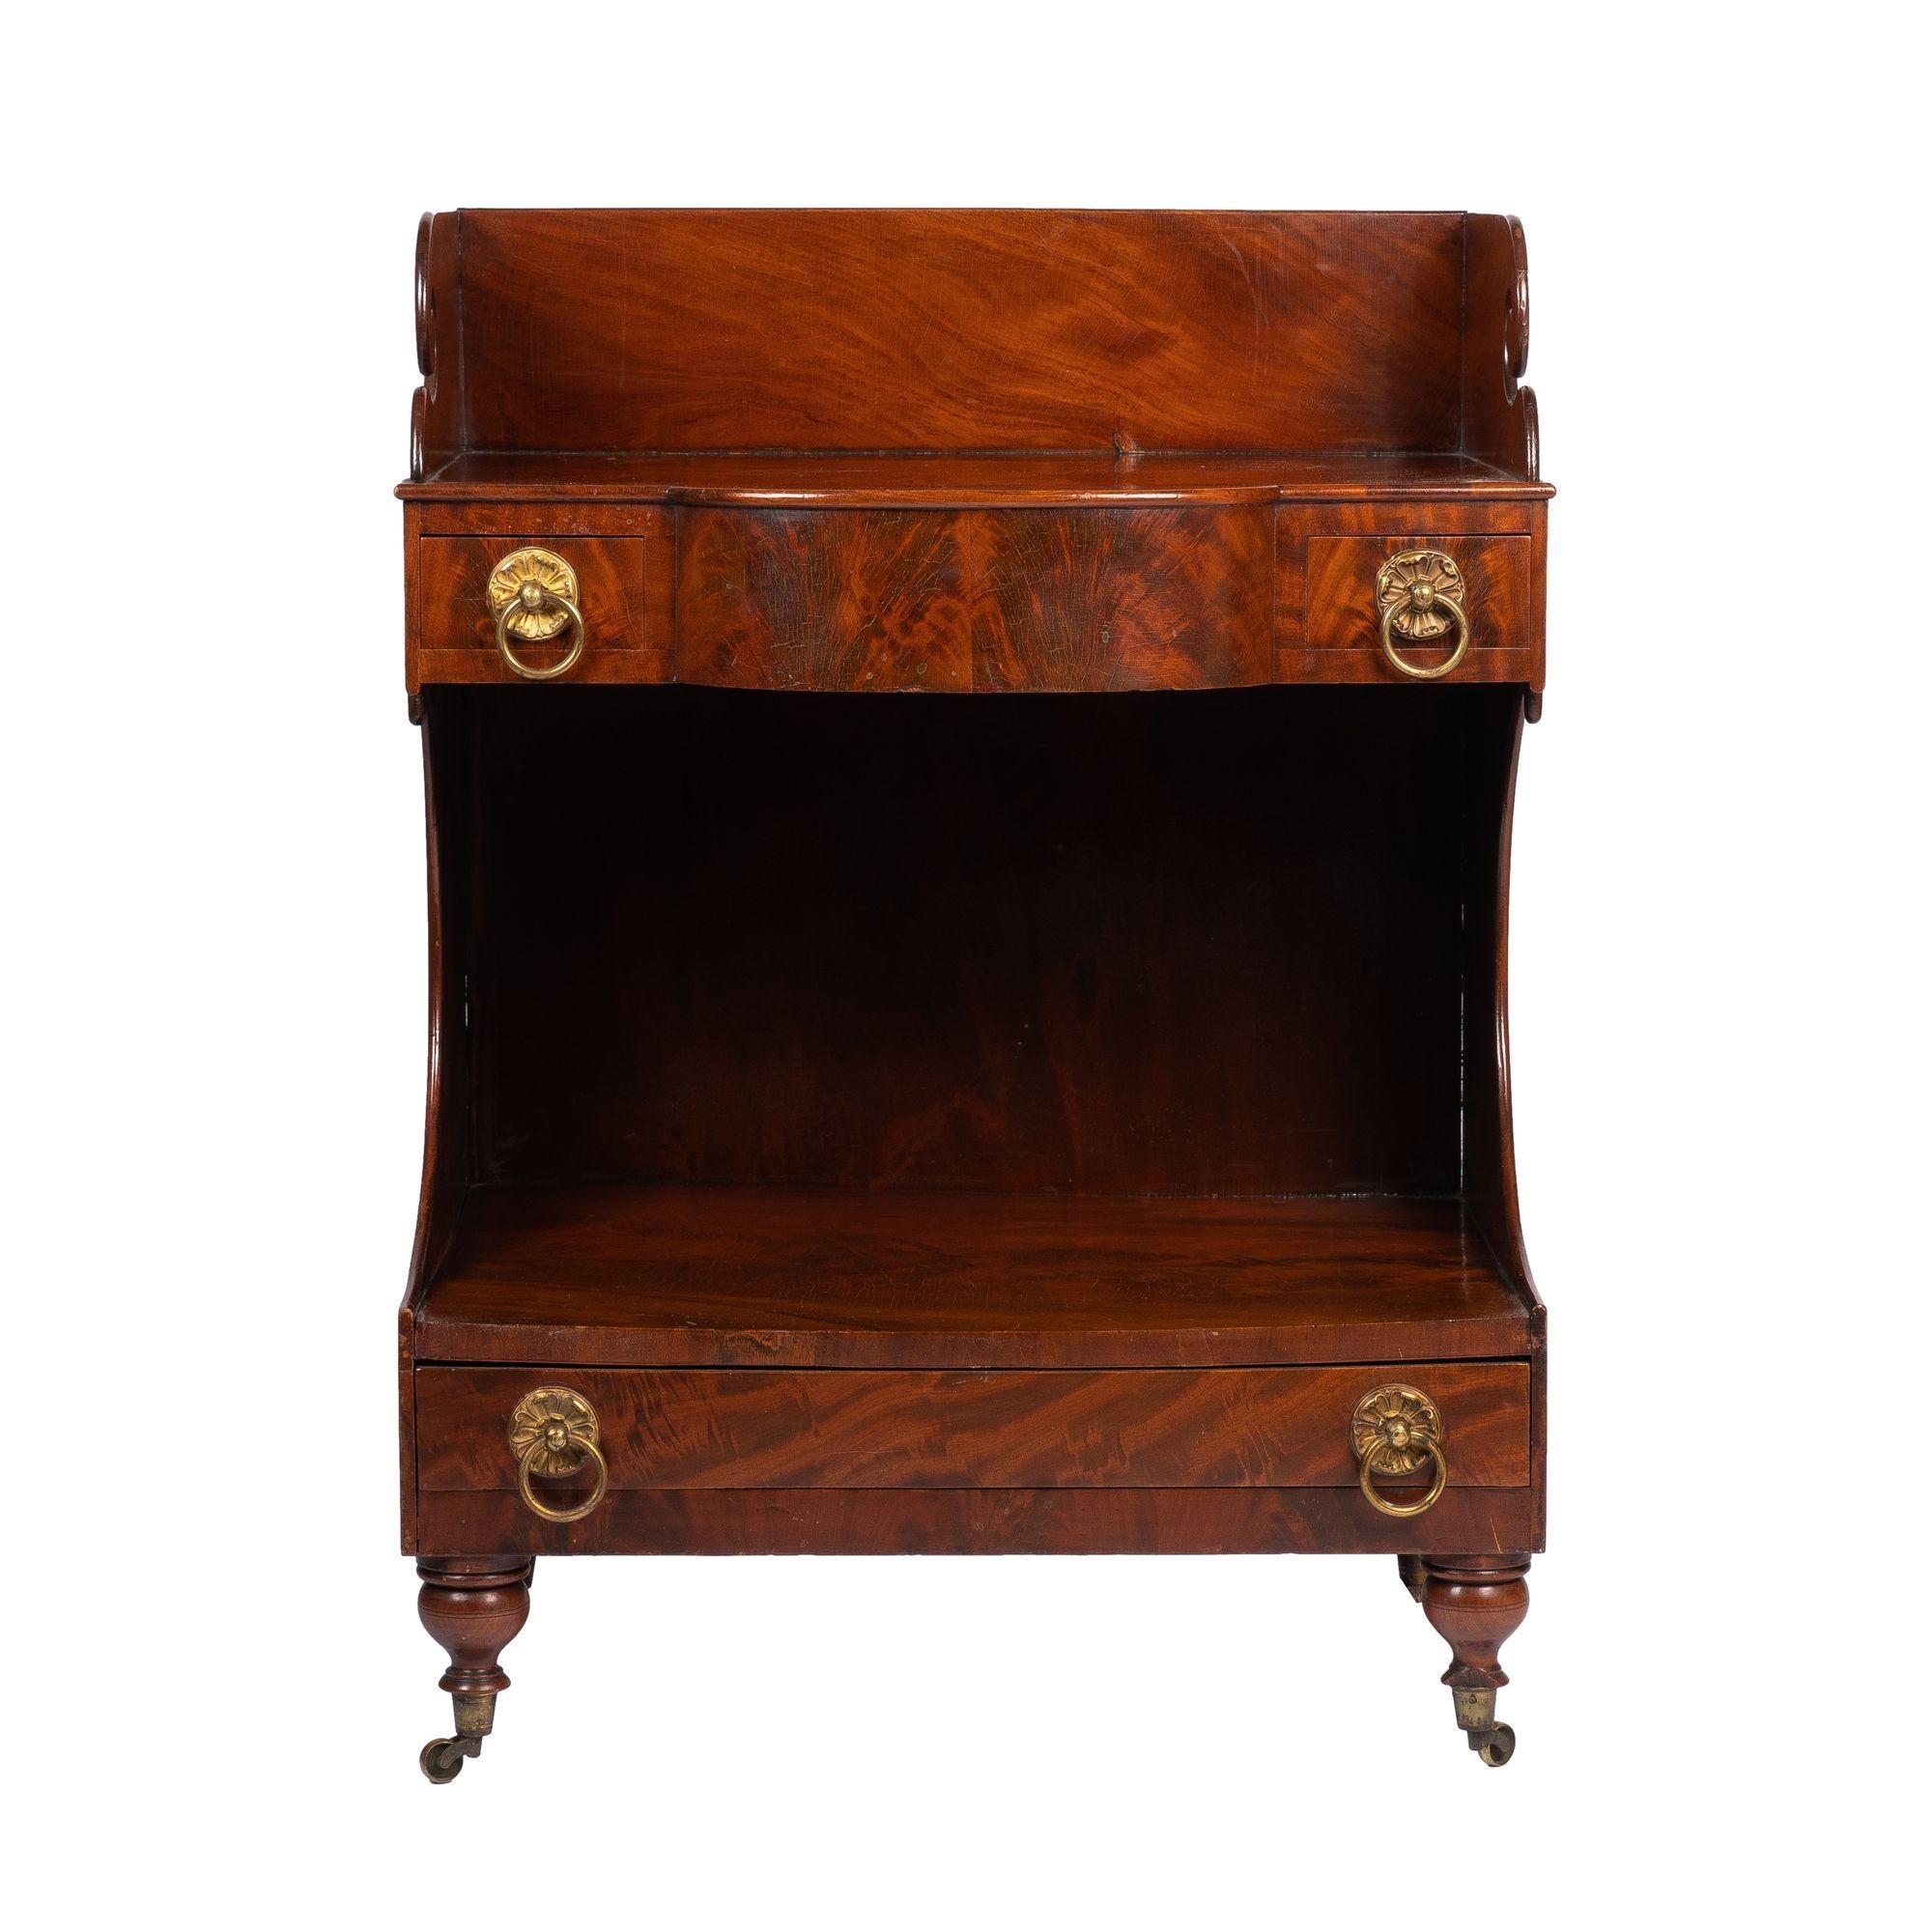 American Mahogany Demilune Dressing Stand on Brass Castors, 1830 For Sale 2